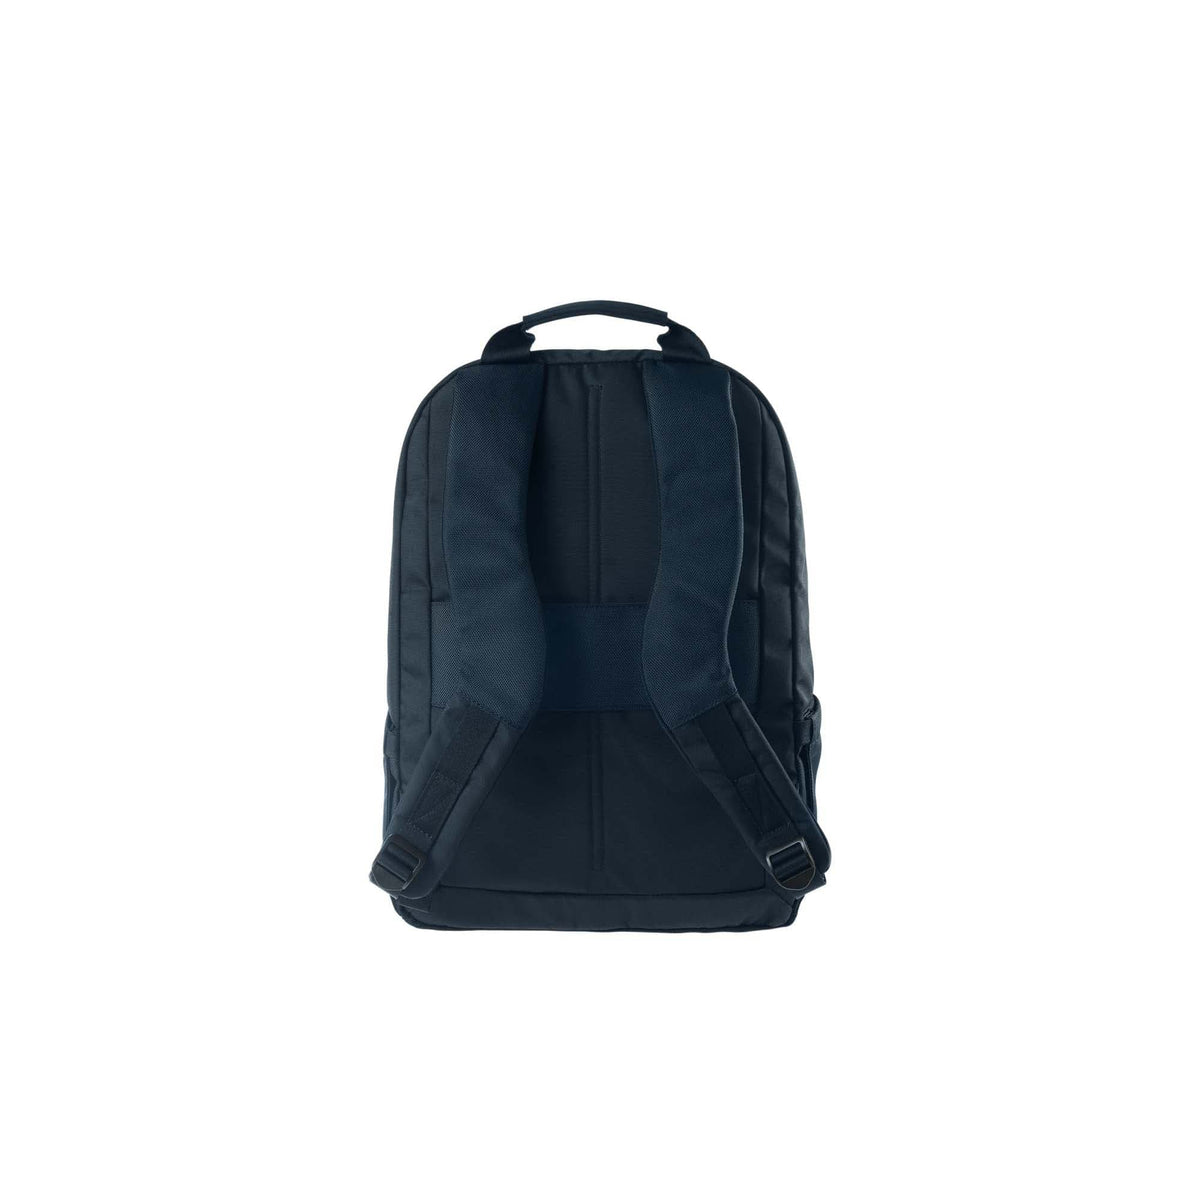 Tucano Stilo Backpack for 15" Macbook and Up to 17" Laptop